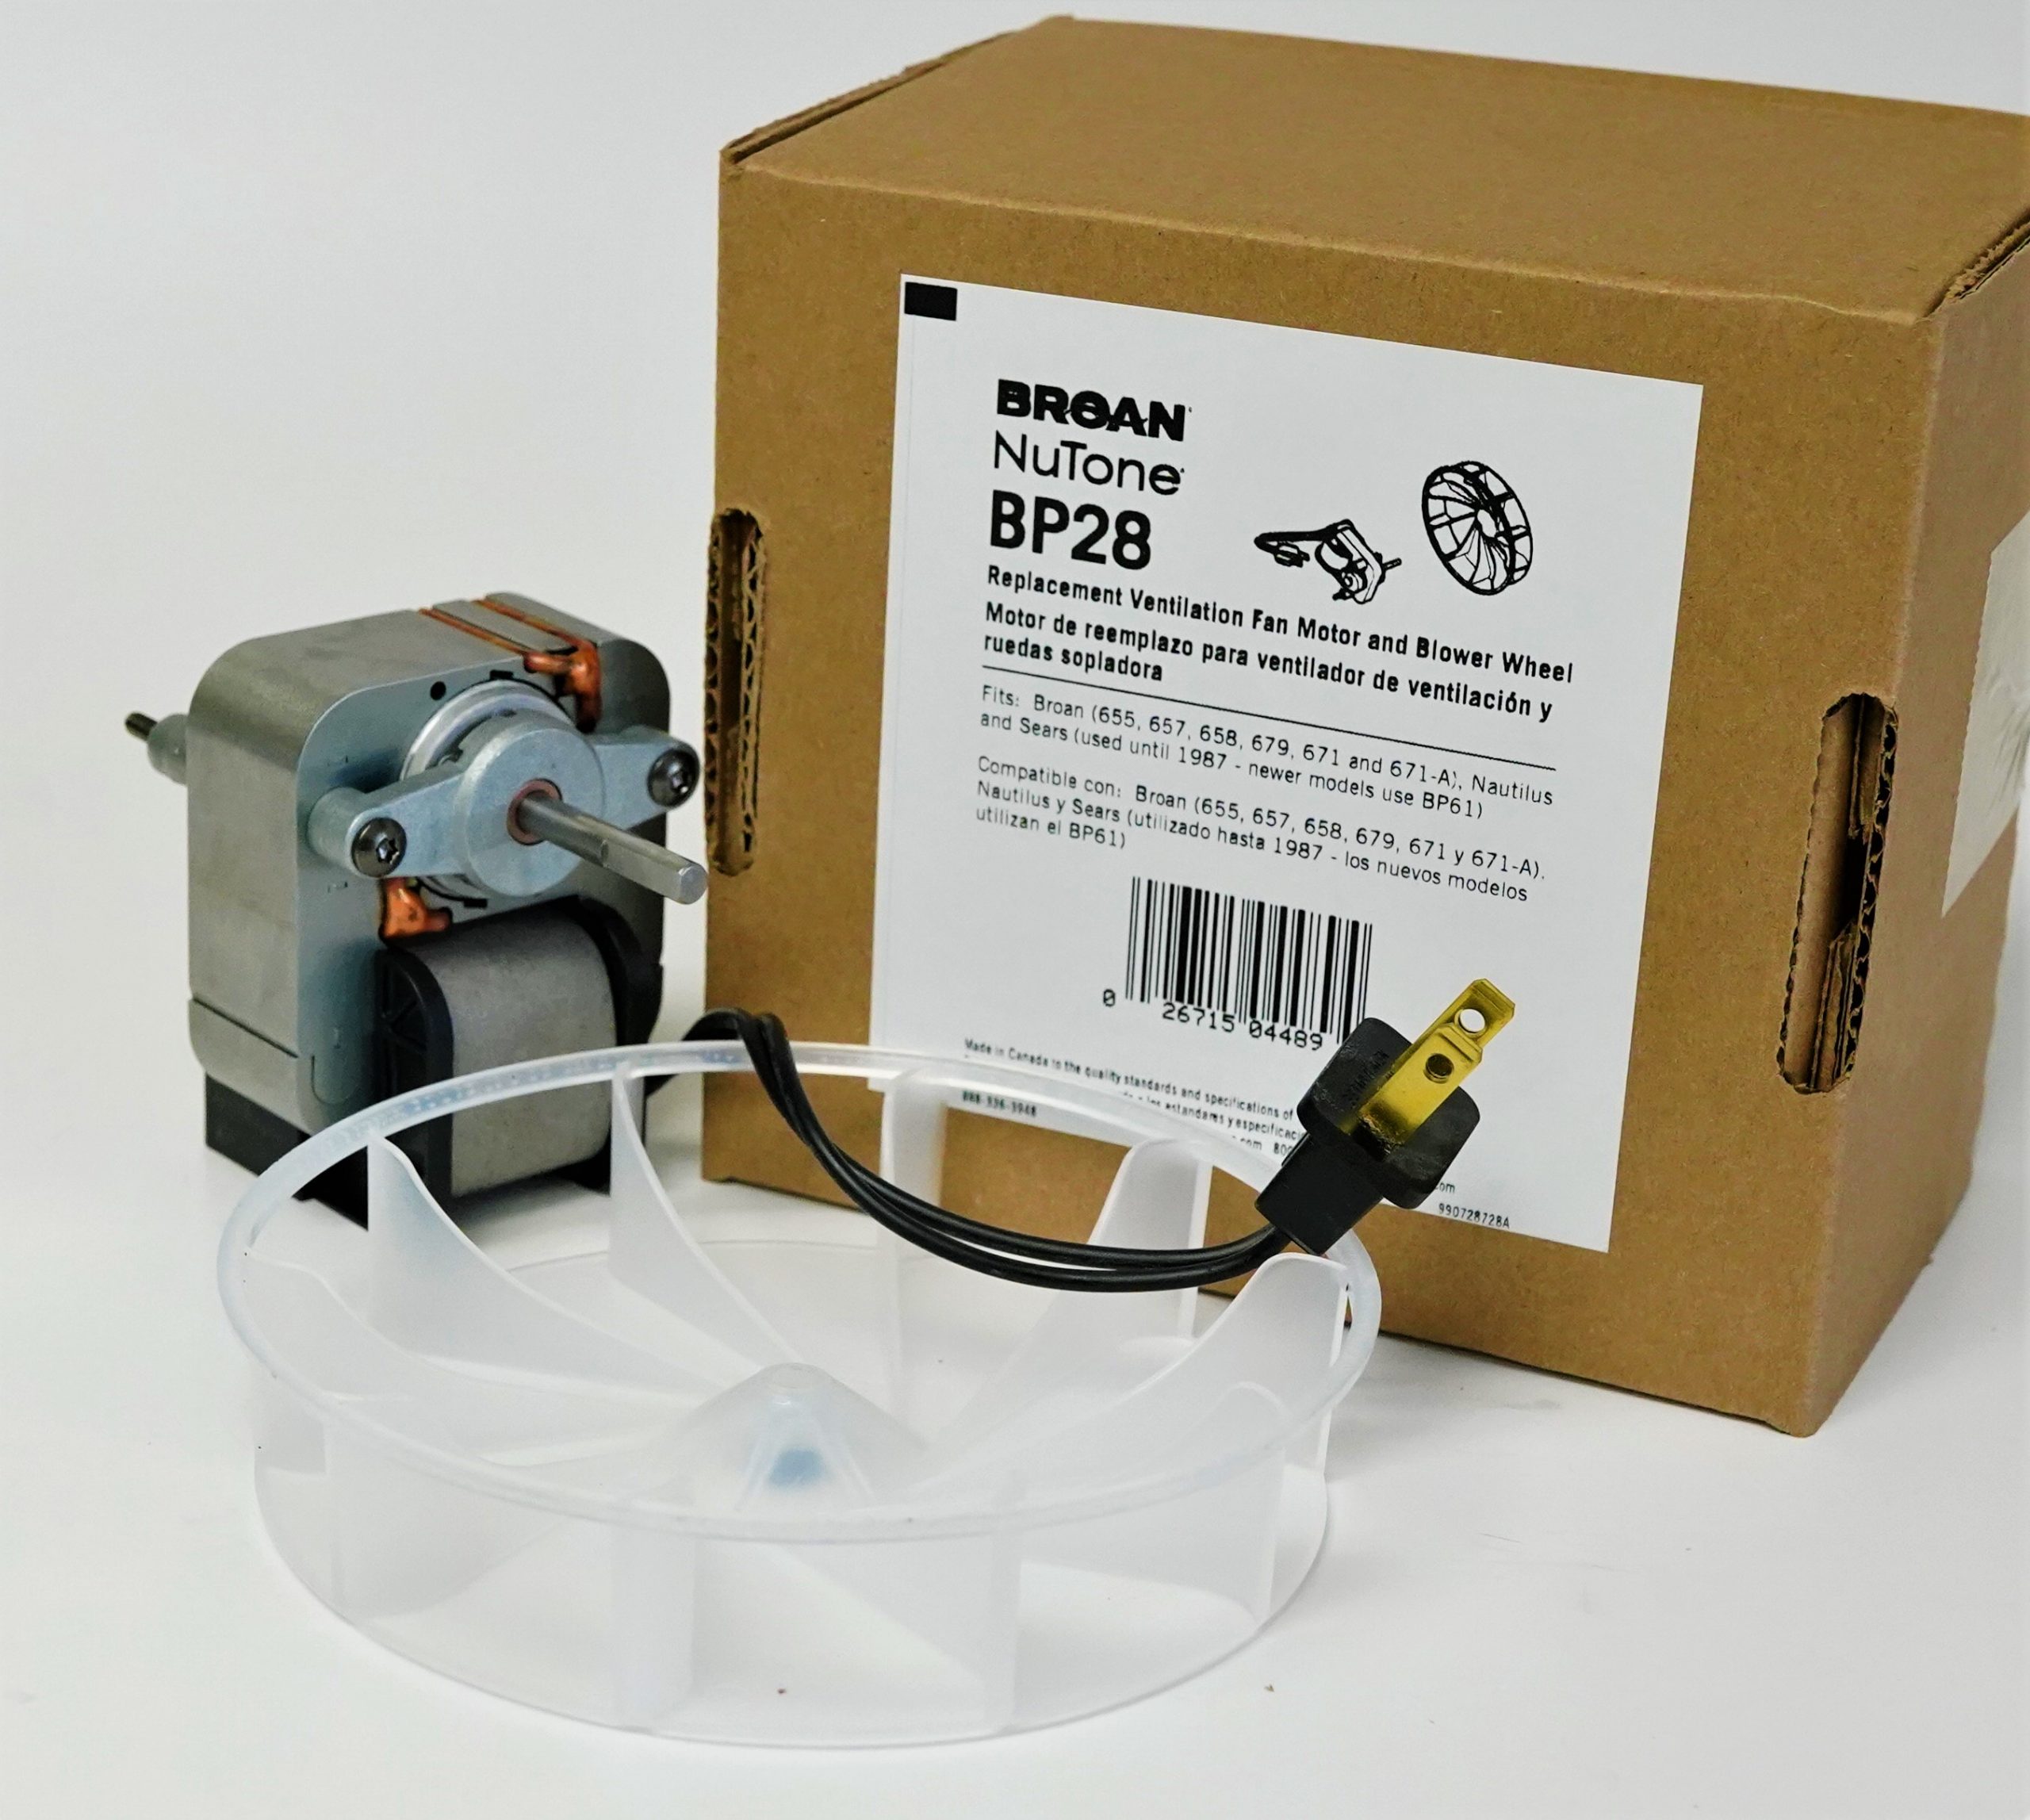 Details About Bp28 Broan Nautilus Vent Fan Motor For 70 Cfm Models 655 657 658 679 671 671a pertaining to sizing 2707 X 2427